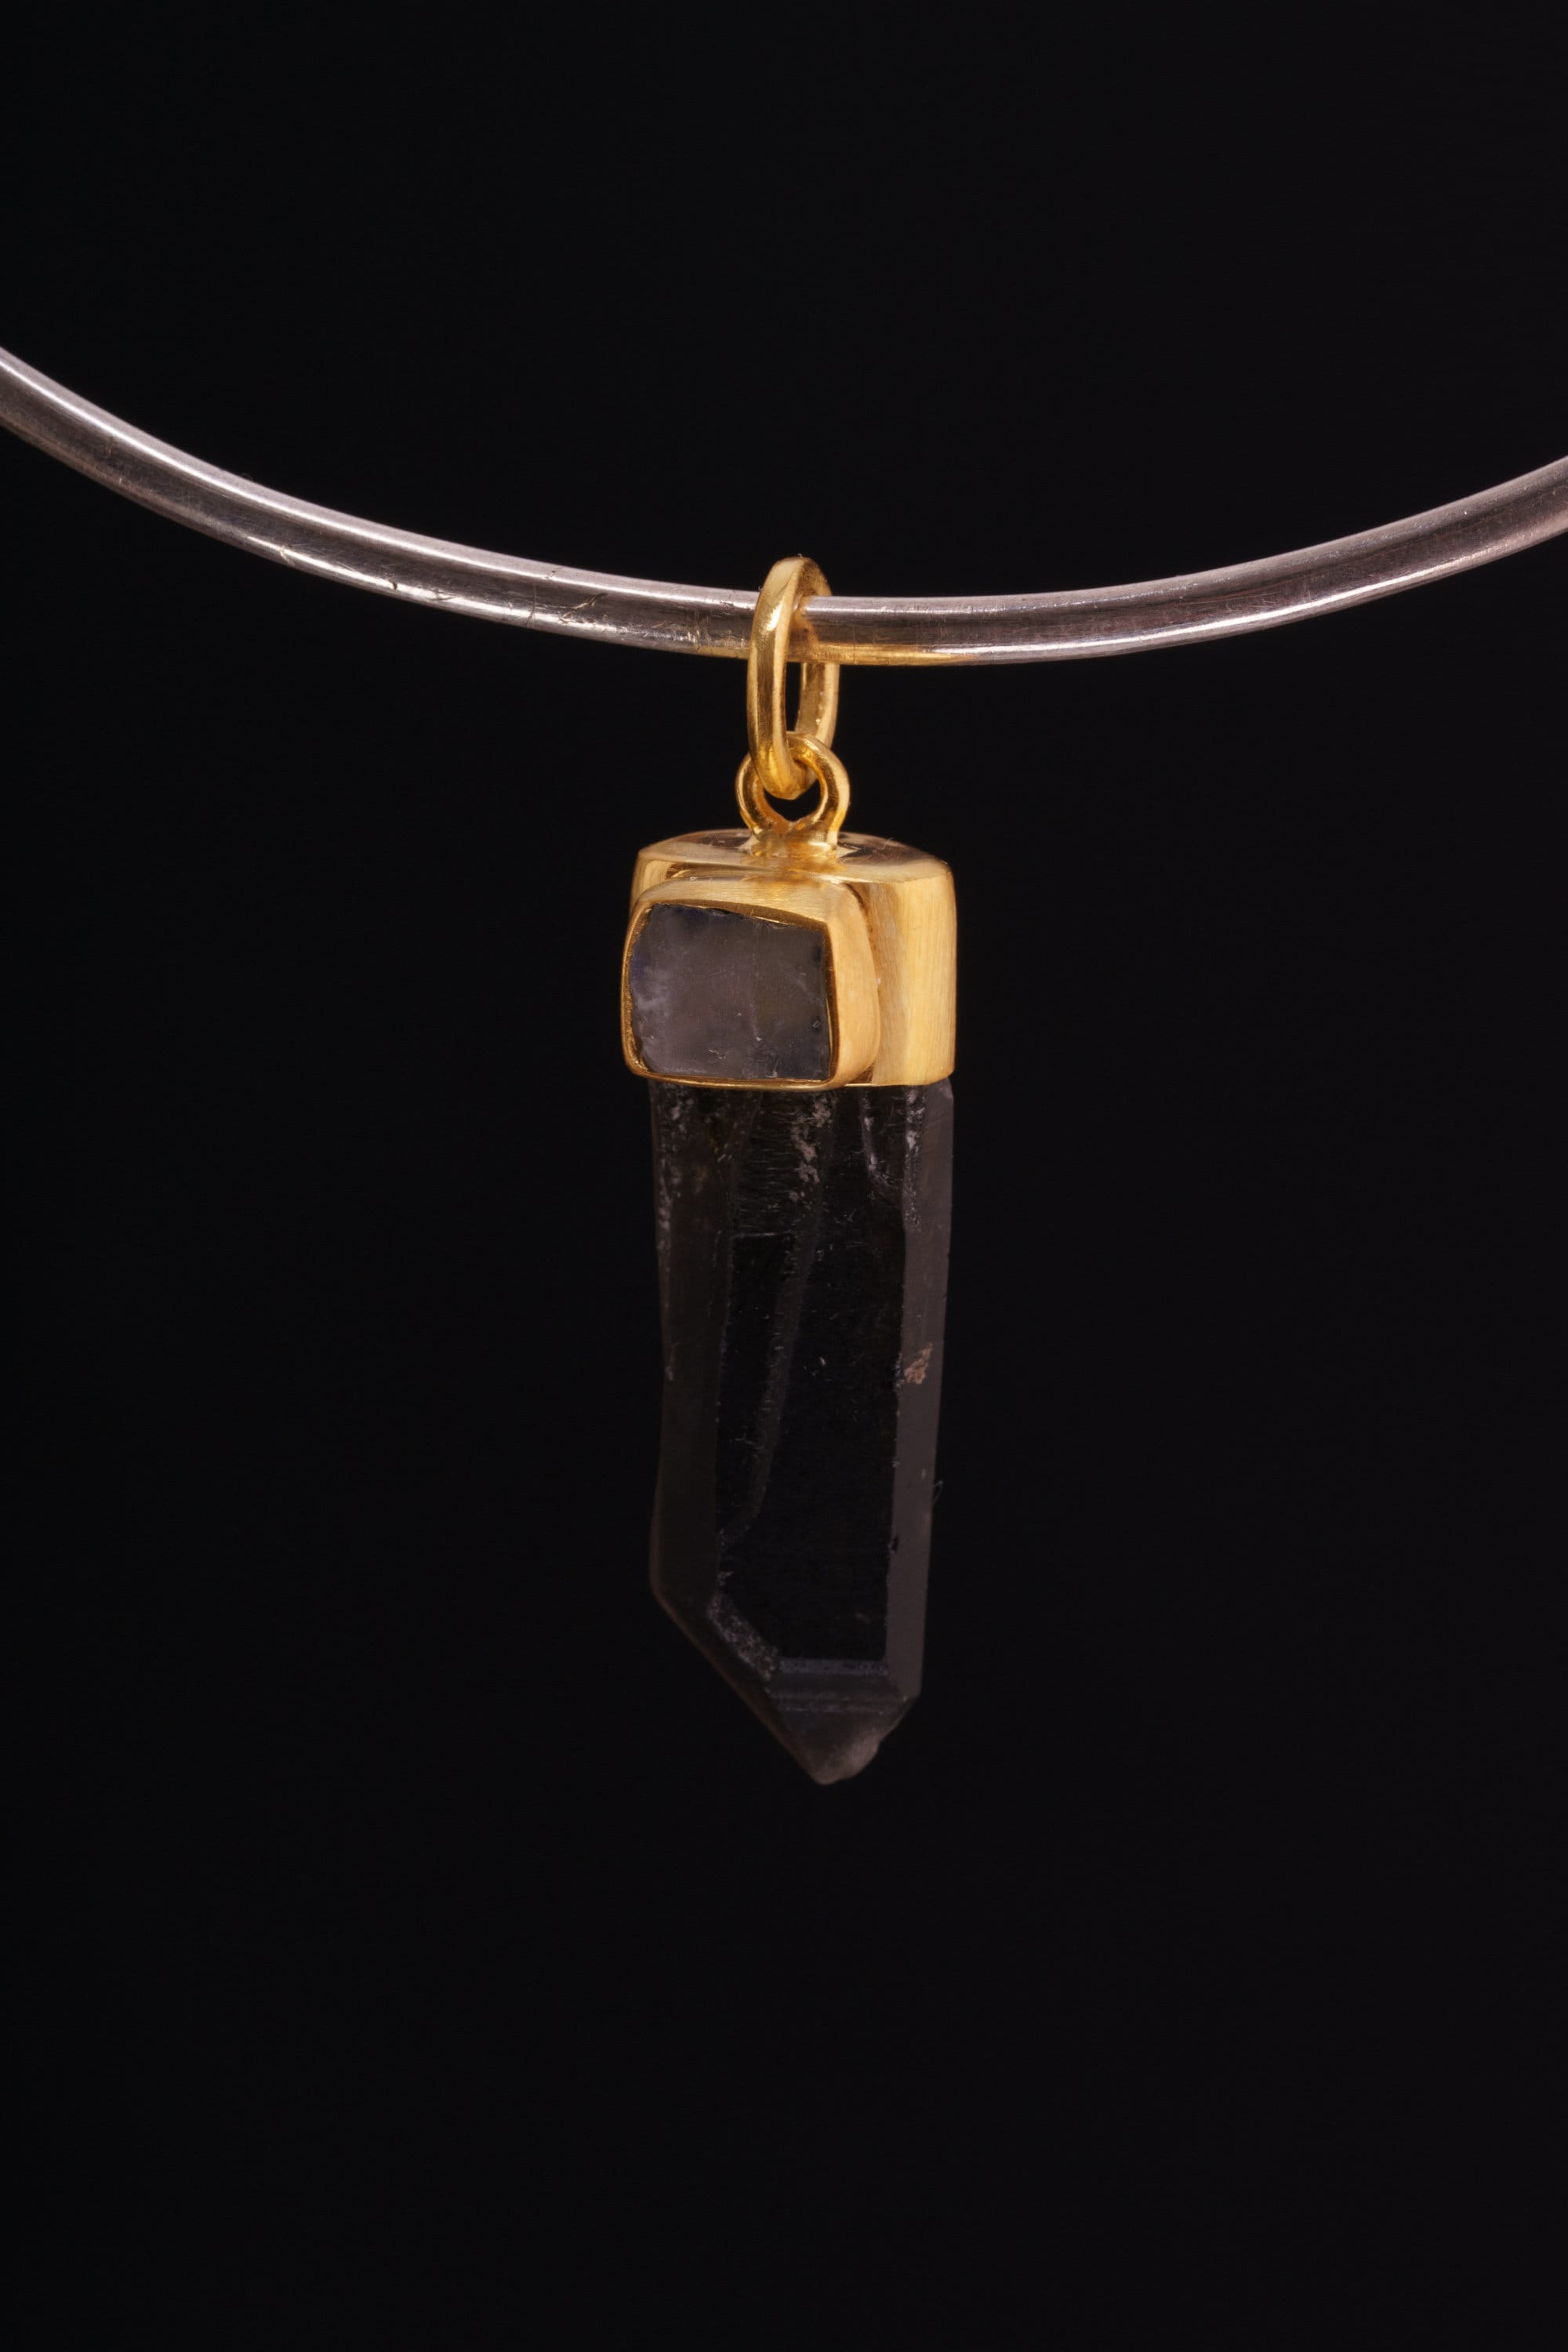 Dark Smokey Lemurian specialty Quartz point with a Raw Blue Moonstone - Gold Plated Sterling Silver - Crystal Necklace Pendant 7